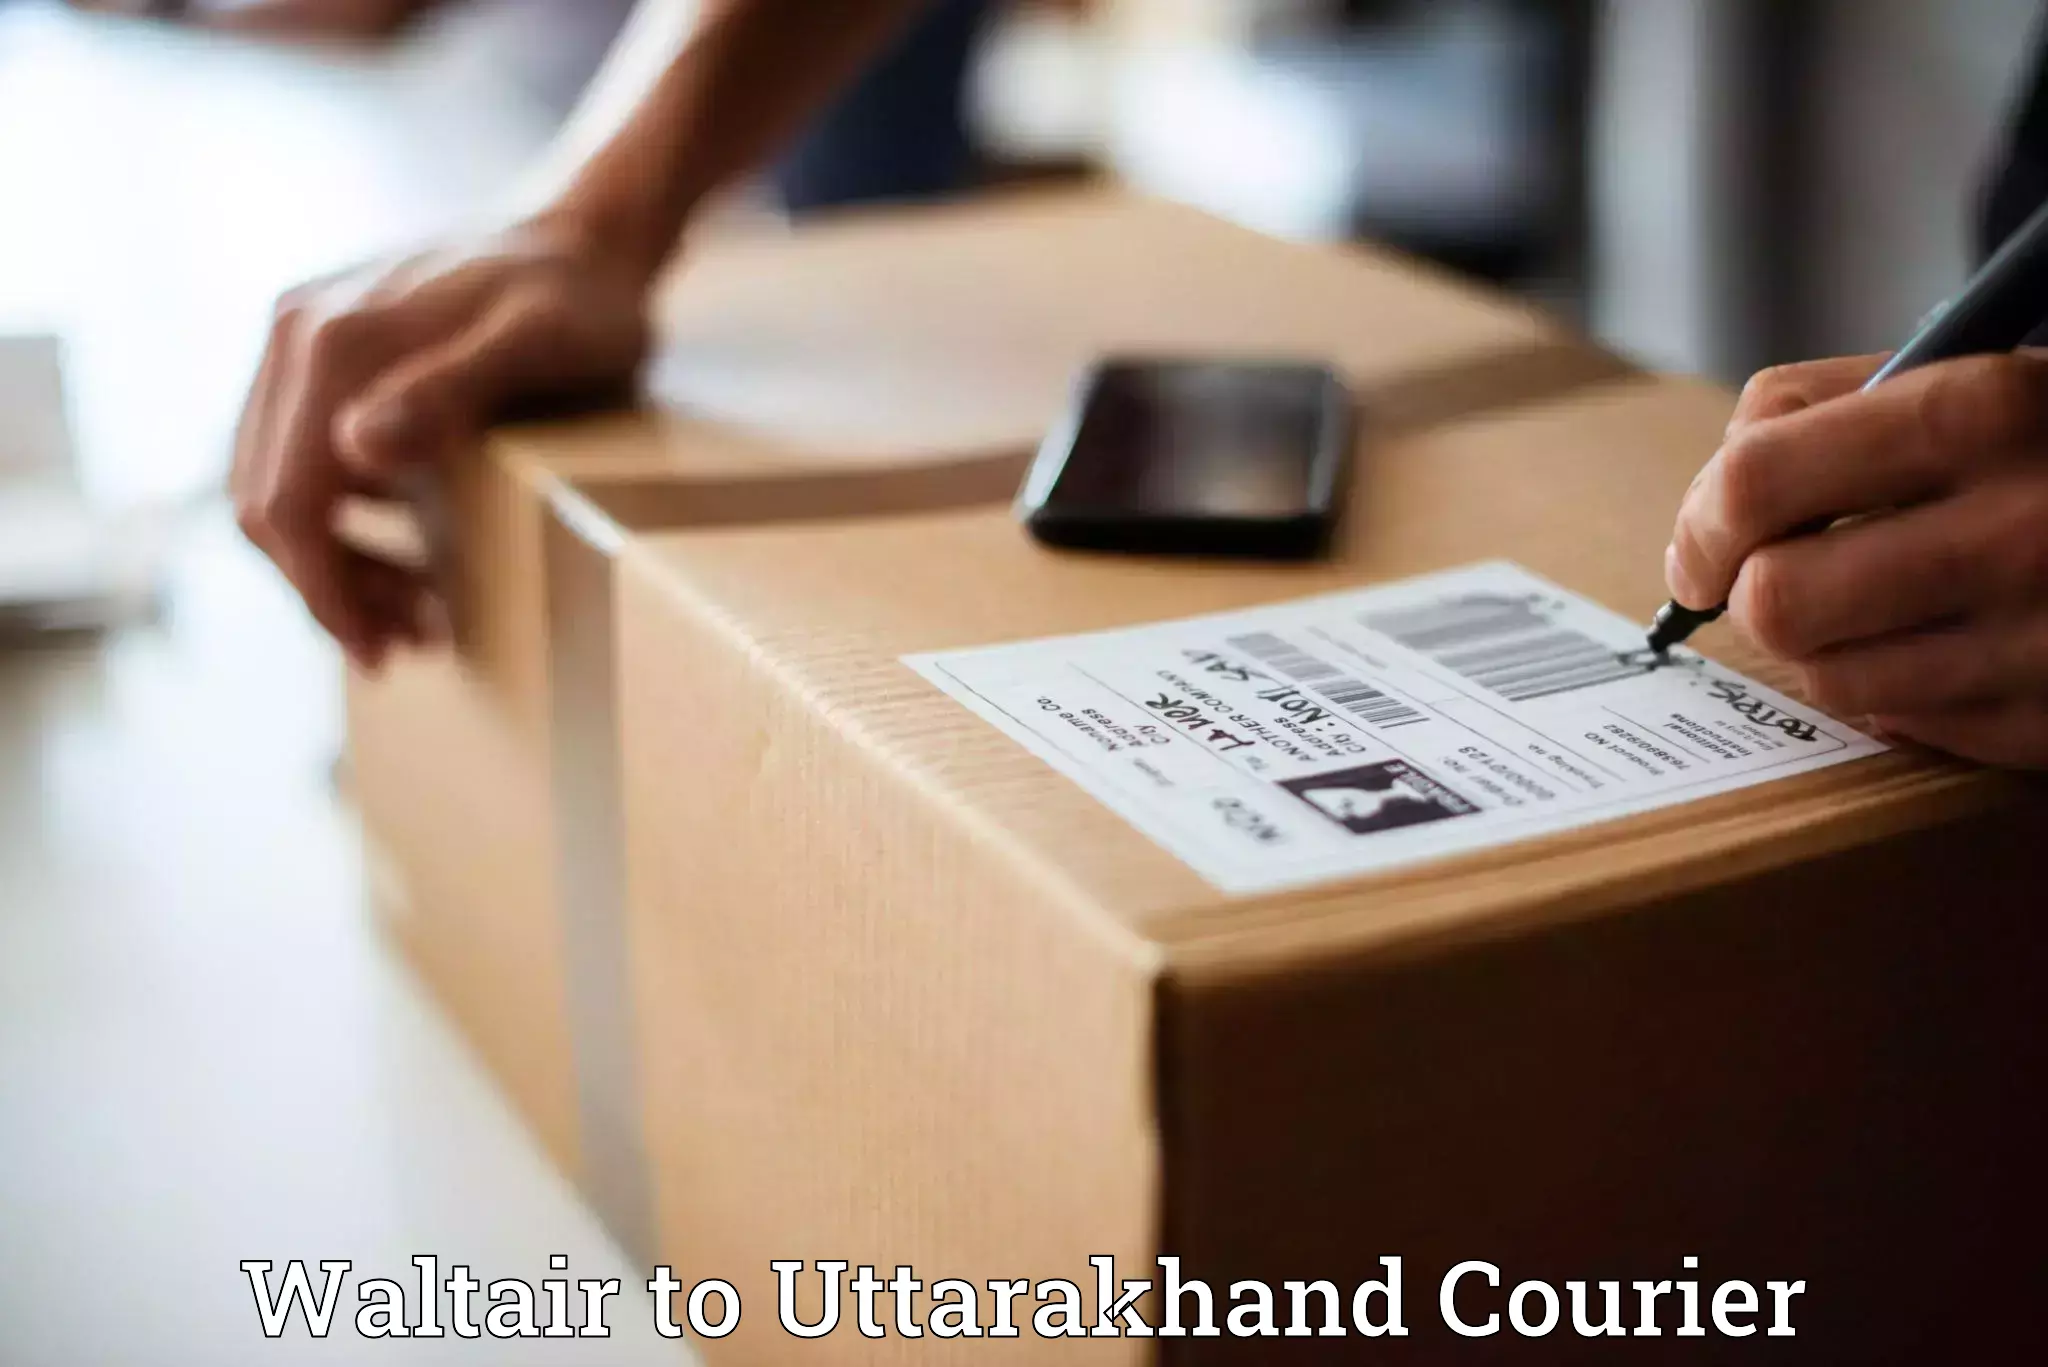 Courier service innovation Waltair to Uttarakhand